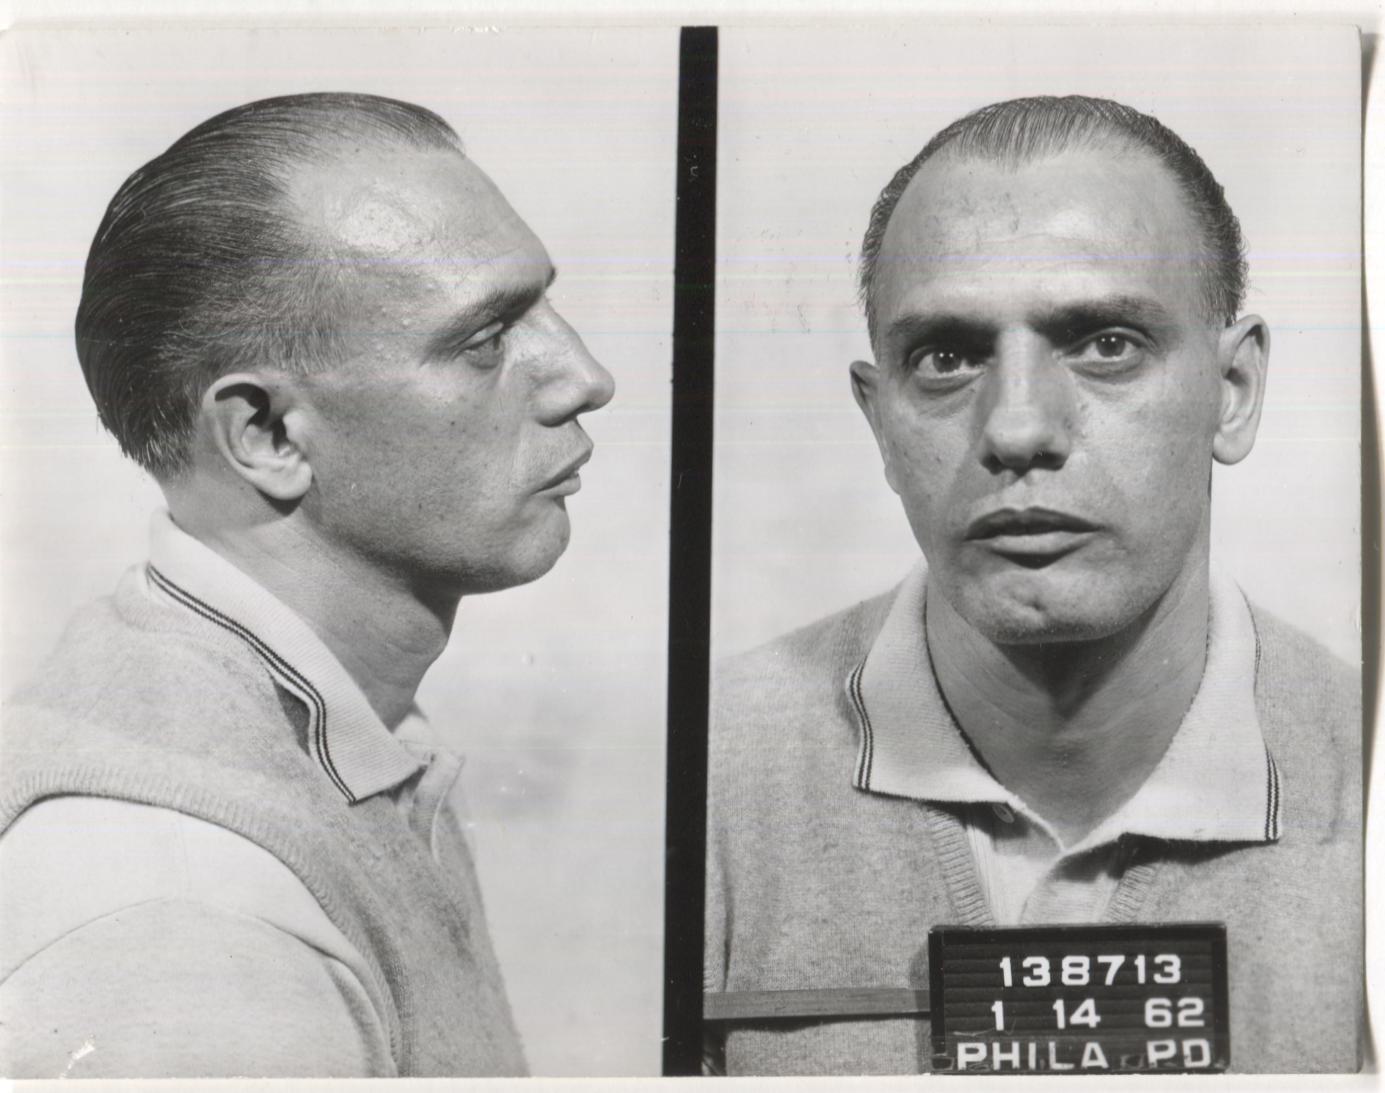 Thomas Pasquale Mugshot - Arrested on 1/14/1962 for Being a Gambling House Properietor